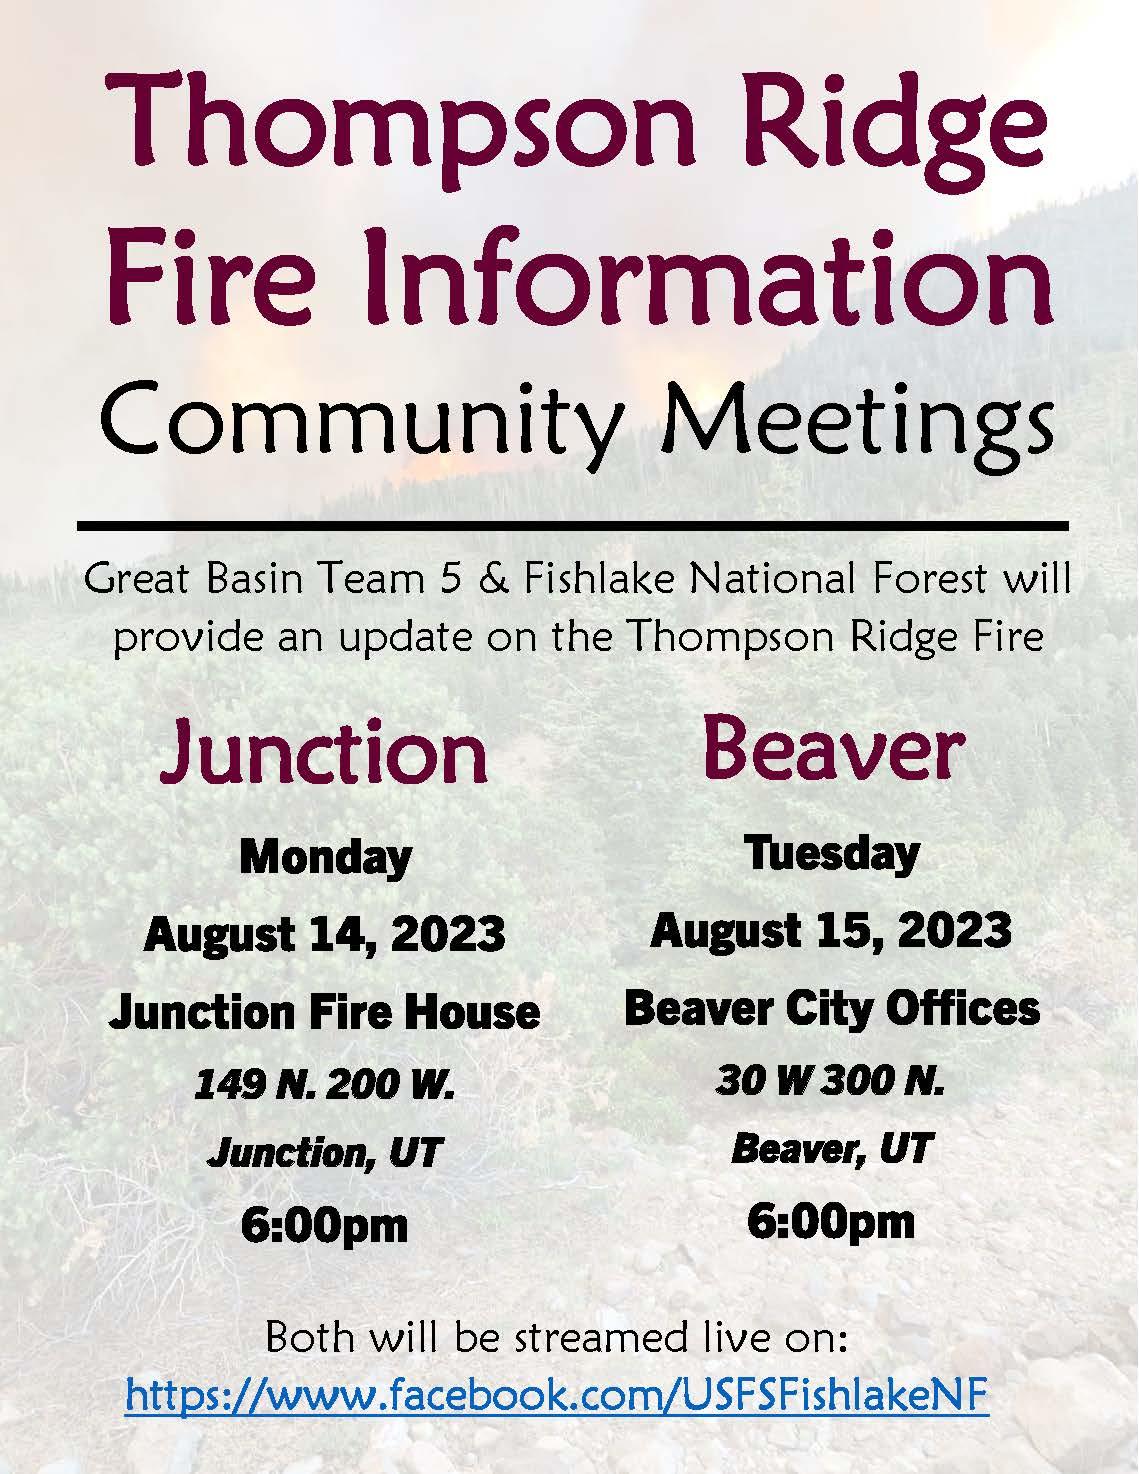 Flyer for public meetings